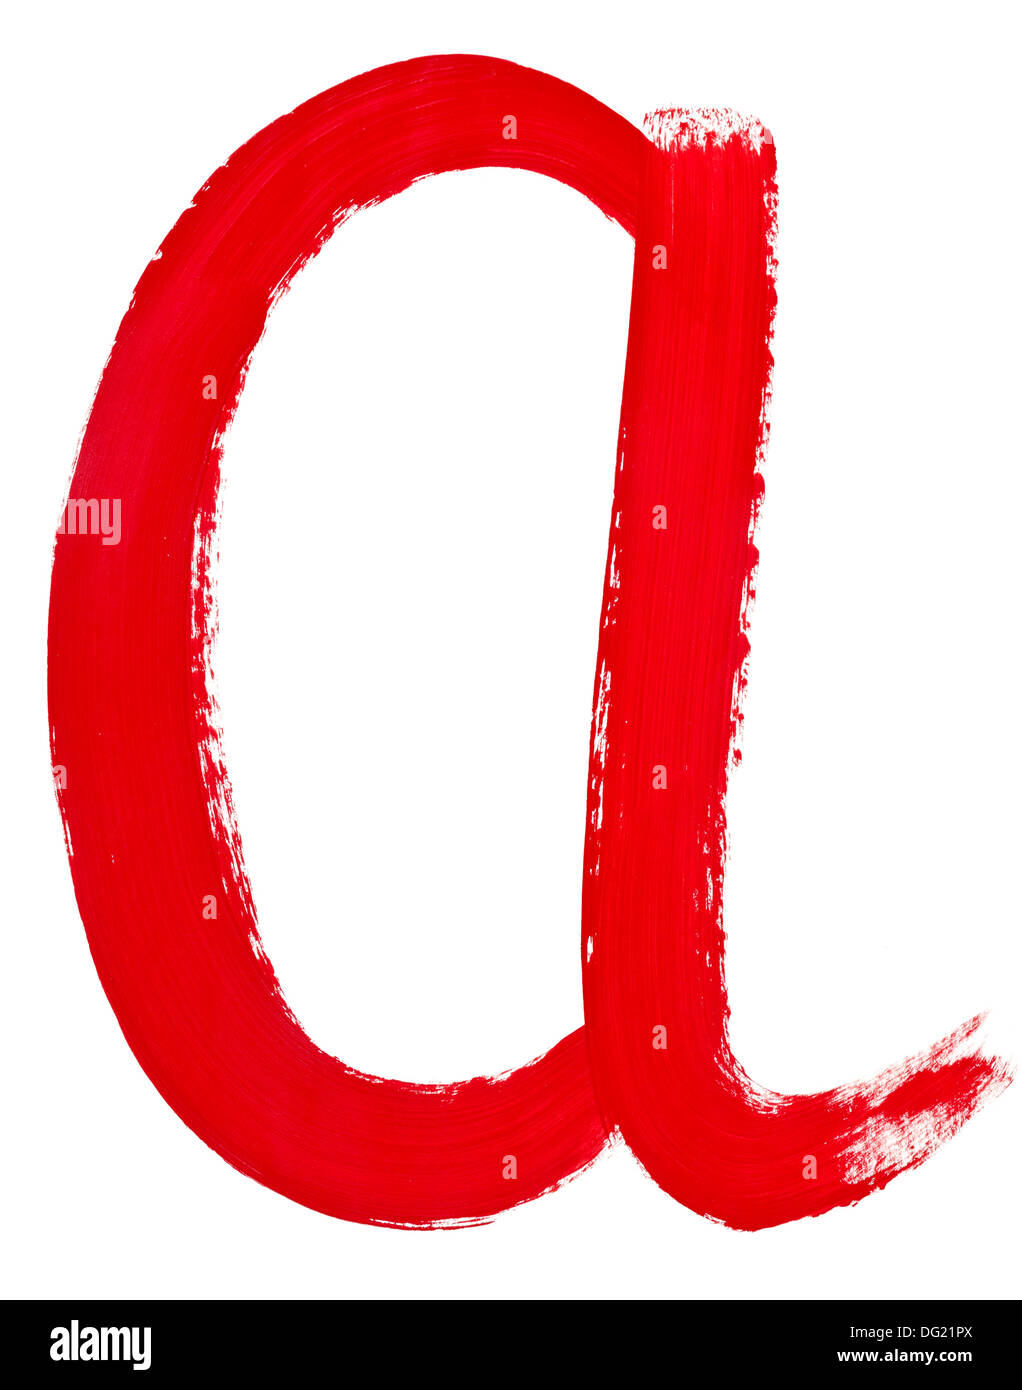 letter a hand painted by red brush on white background Stock Photo